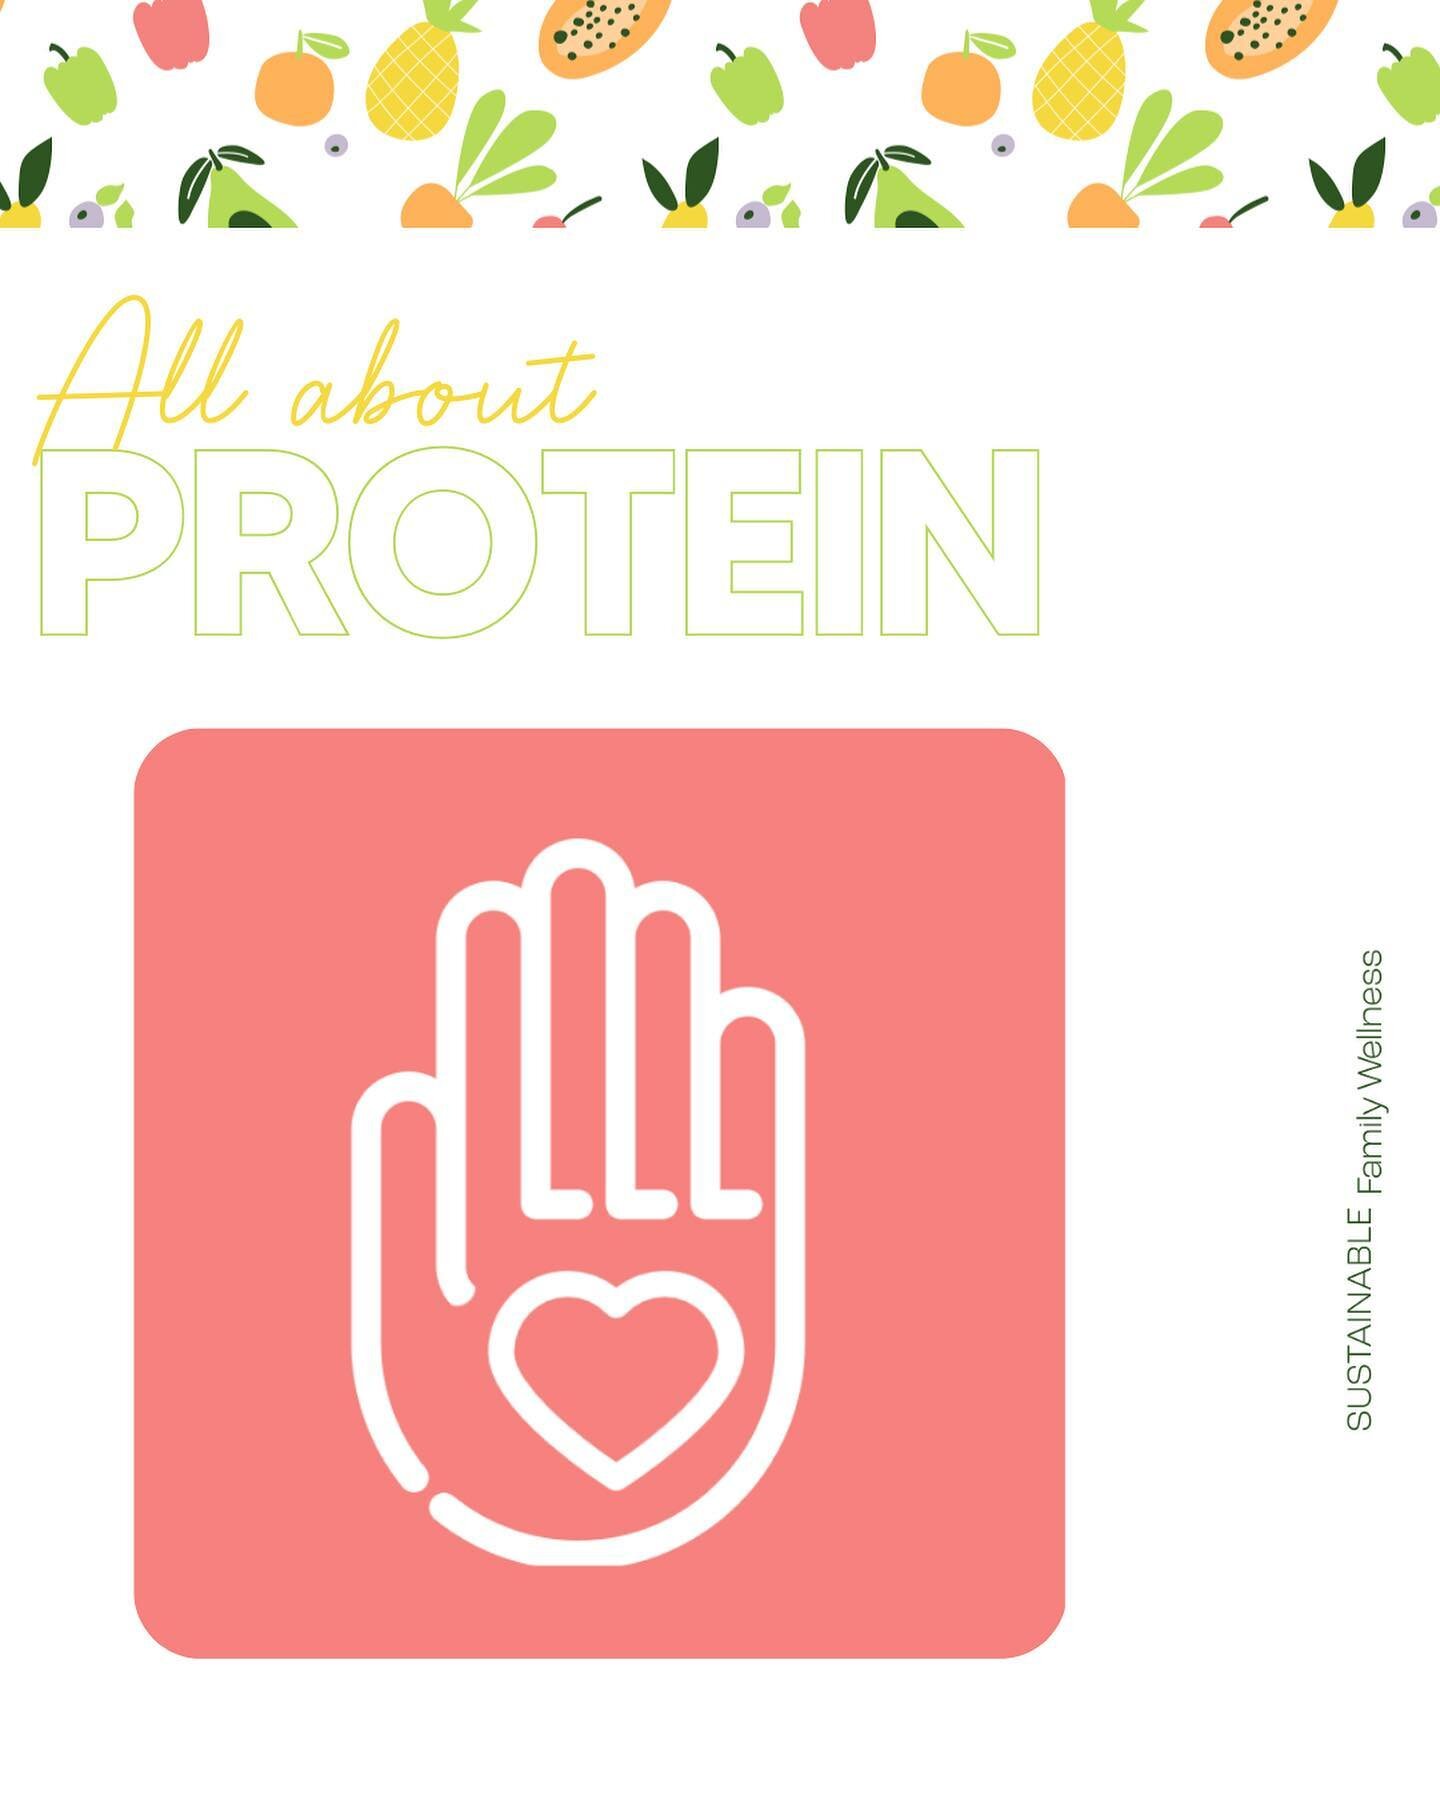 An easy way to measure the portion of protein at each meal would be to fill your plate with about a PALMS size amount! Here are my favorite proteins:
 + Meat: chicken, Turkey, G. Beef, Steak, Tuna salad,  Salmon, Halibut 
 + Eggs: chicken, quail, duc